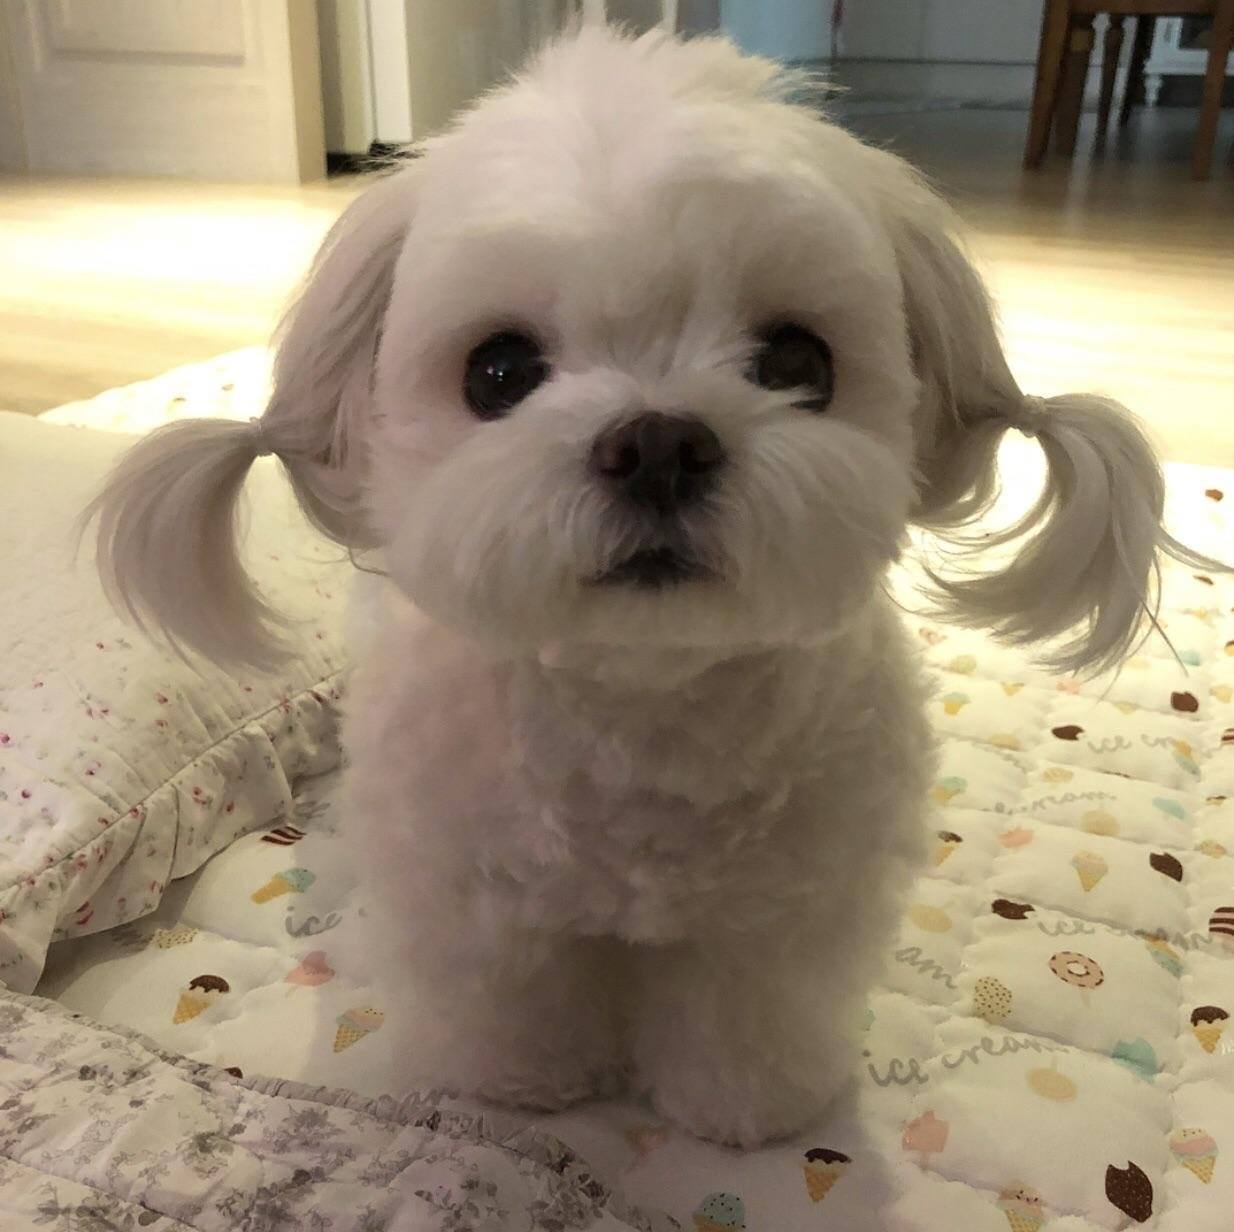 An adorable Maltese sitting on its bed with a pony tail on the side of its face